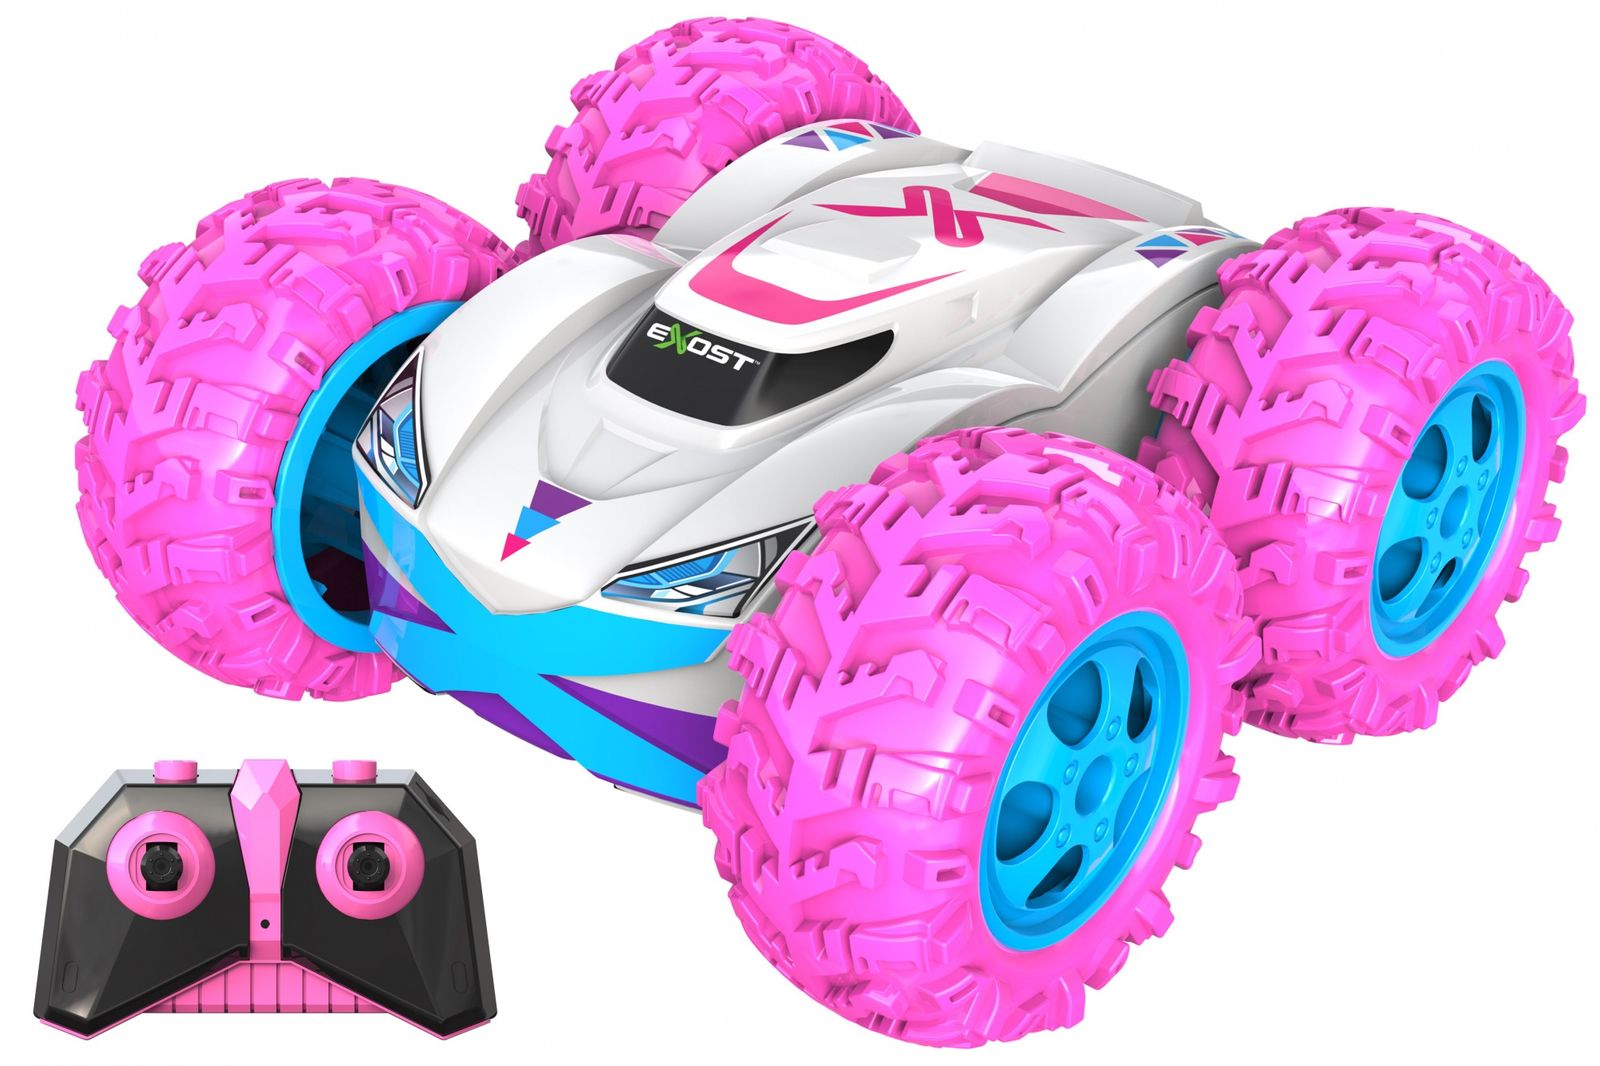 EXOST RC 20260 360 CROSS AMAZONE by Silverlit, remote control car, 2.4 Ghz technology, action and fun, girly design, scale 1:18, pink, from 5 years 360 Cross Pink